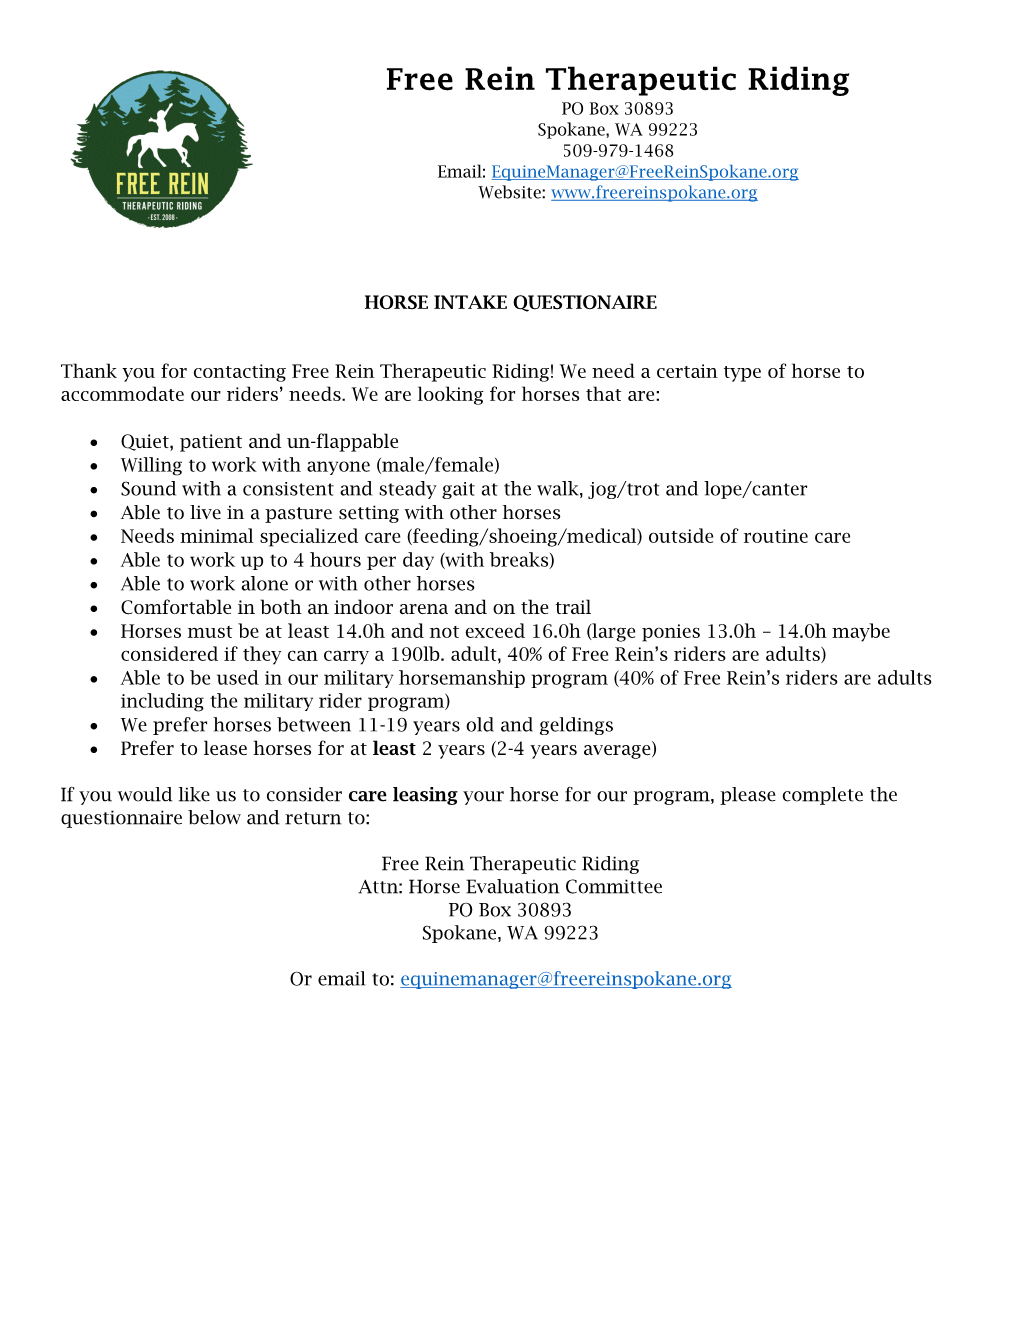 Free Rein Horse Intake Questionaire Sept2019